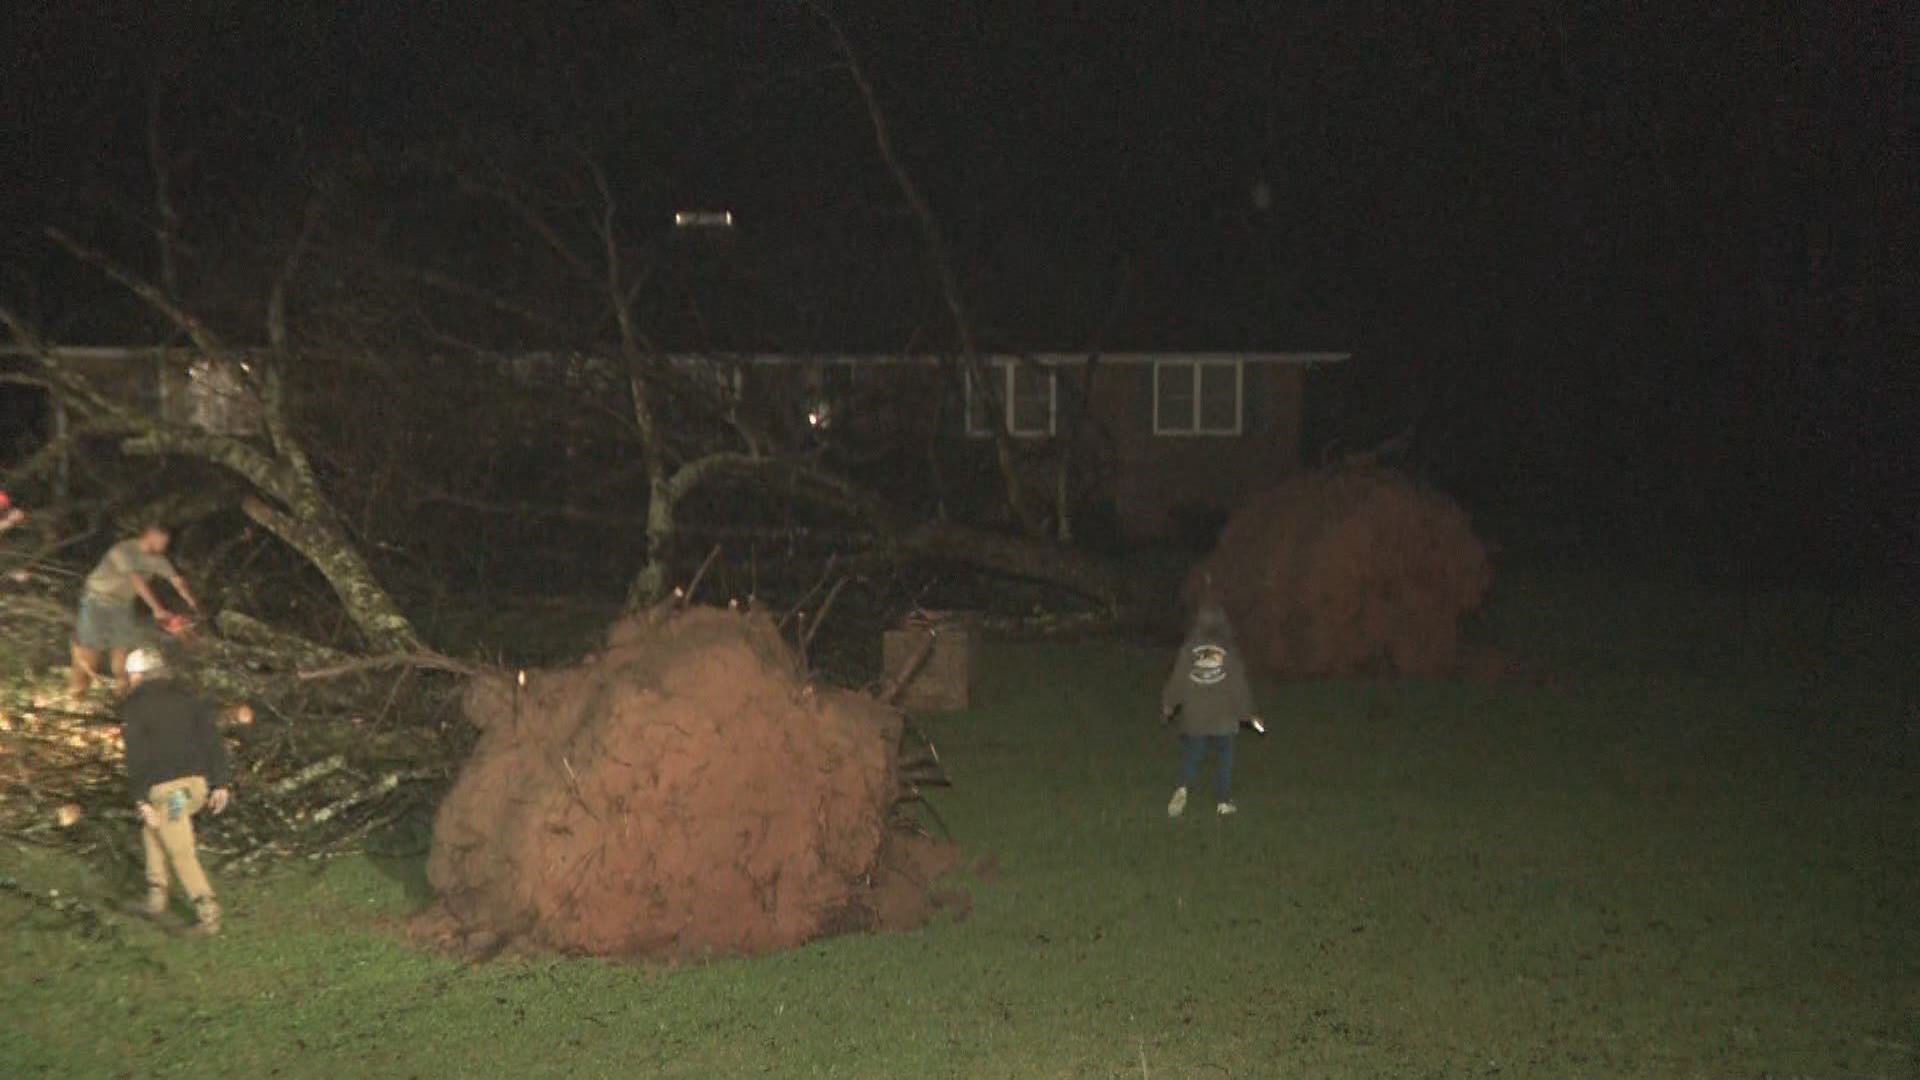 Damage from the March 26 storms in the Smokey Rd. area of Newnan